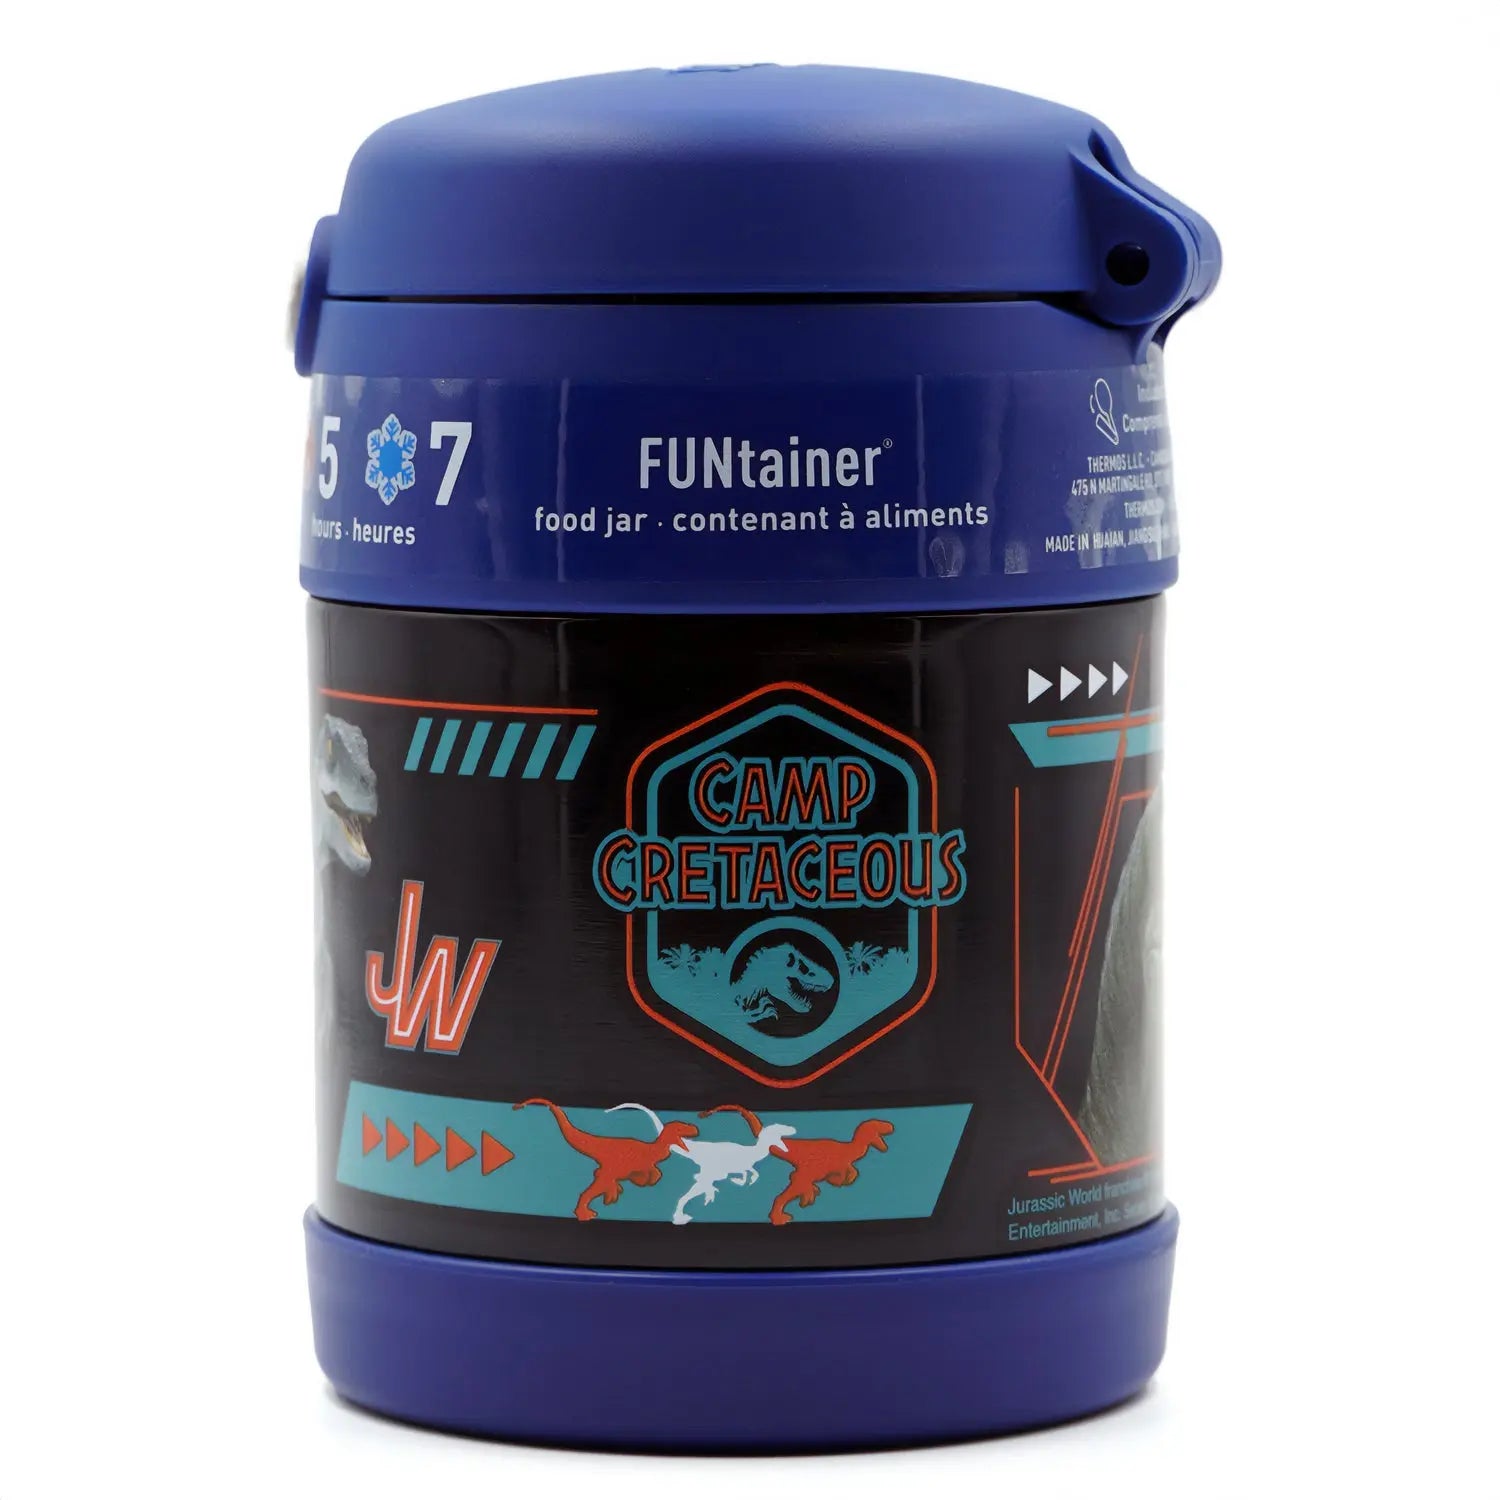 Thermos 10 oz. Kid's Funtainer Stainless Food Jar with Spoon - Jurassic World Thermos